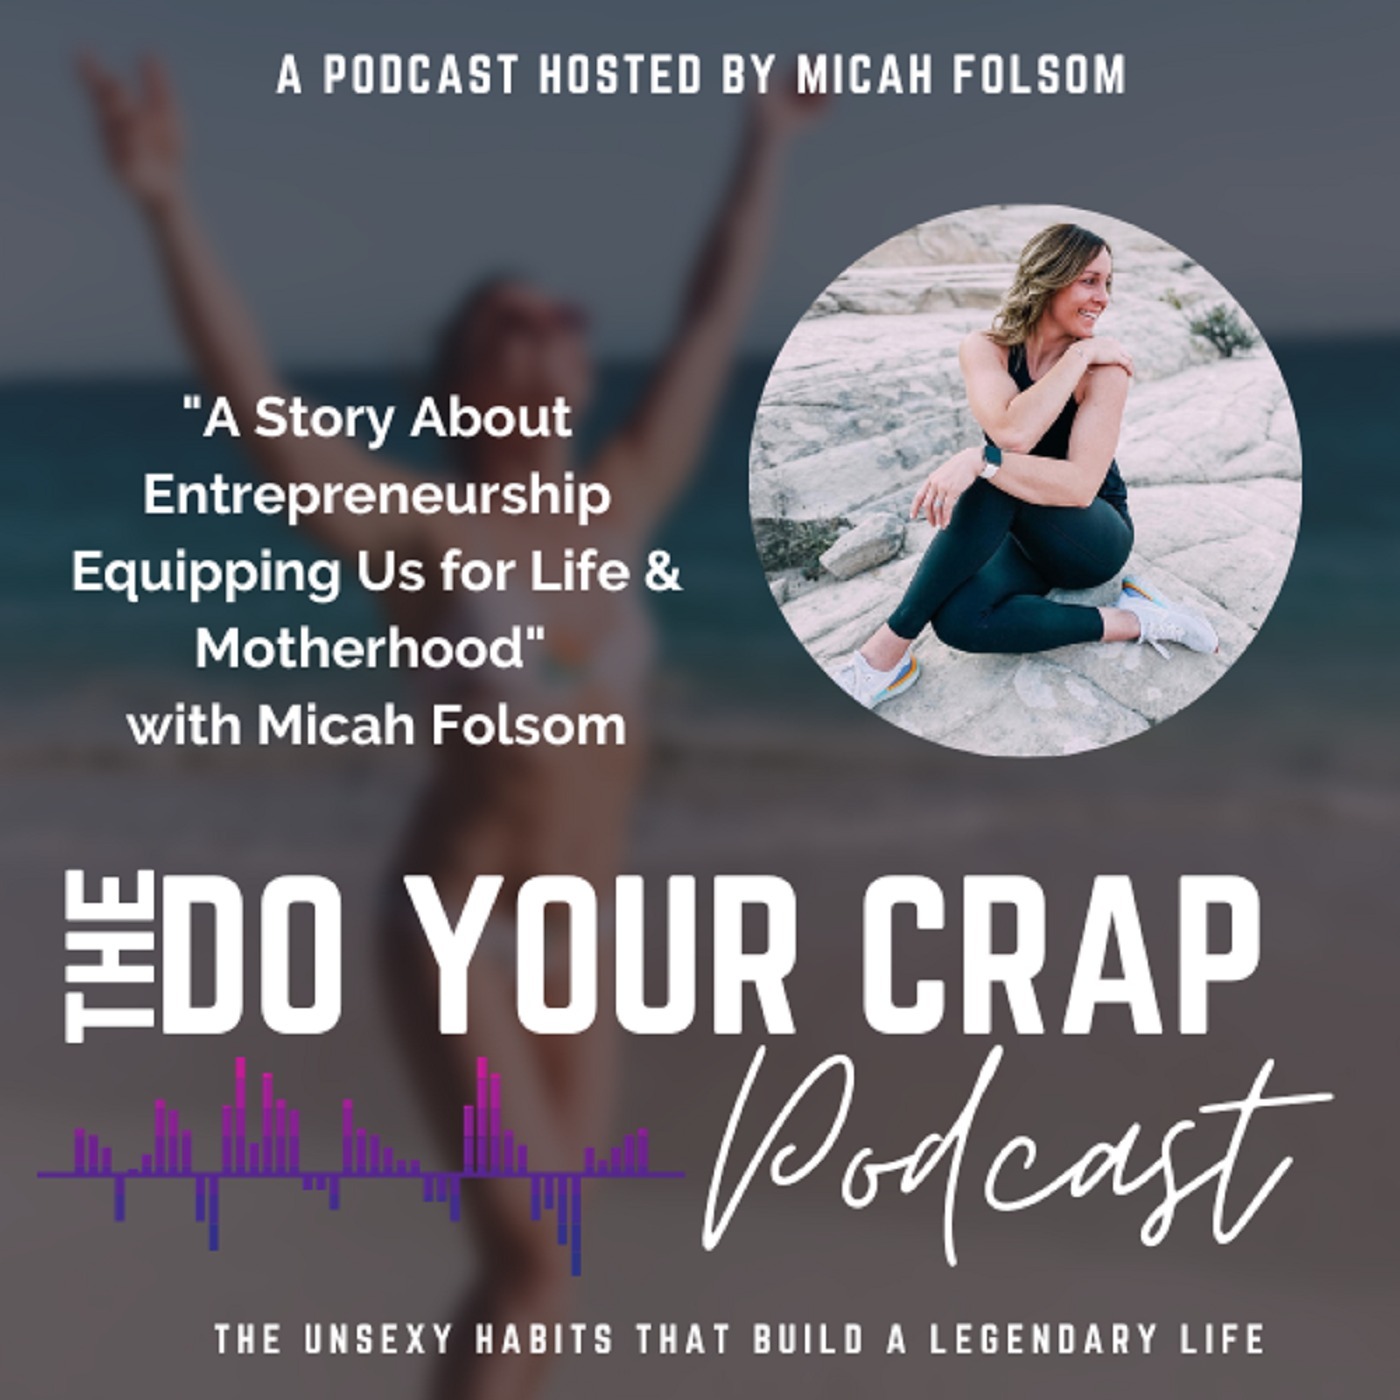 A Story About Entrepreneurship Equipping Us for Life & Motherhood with Micah Folsom